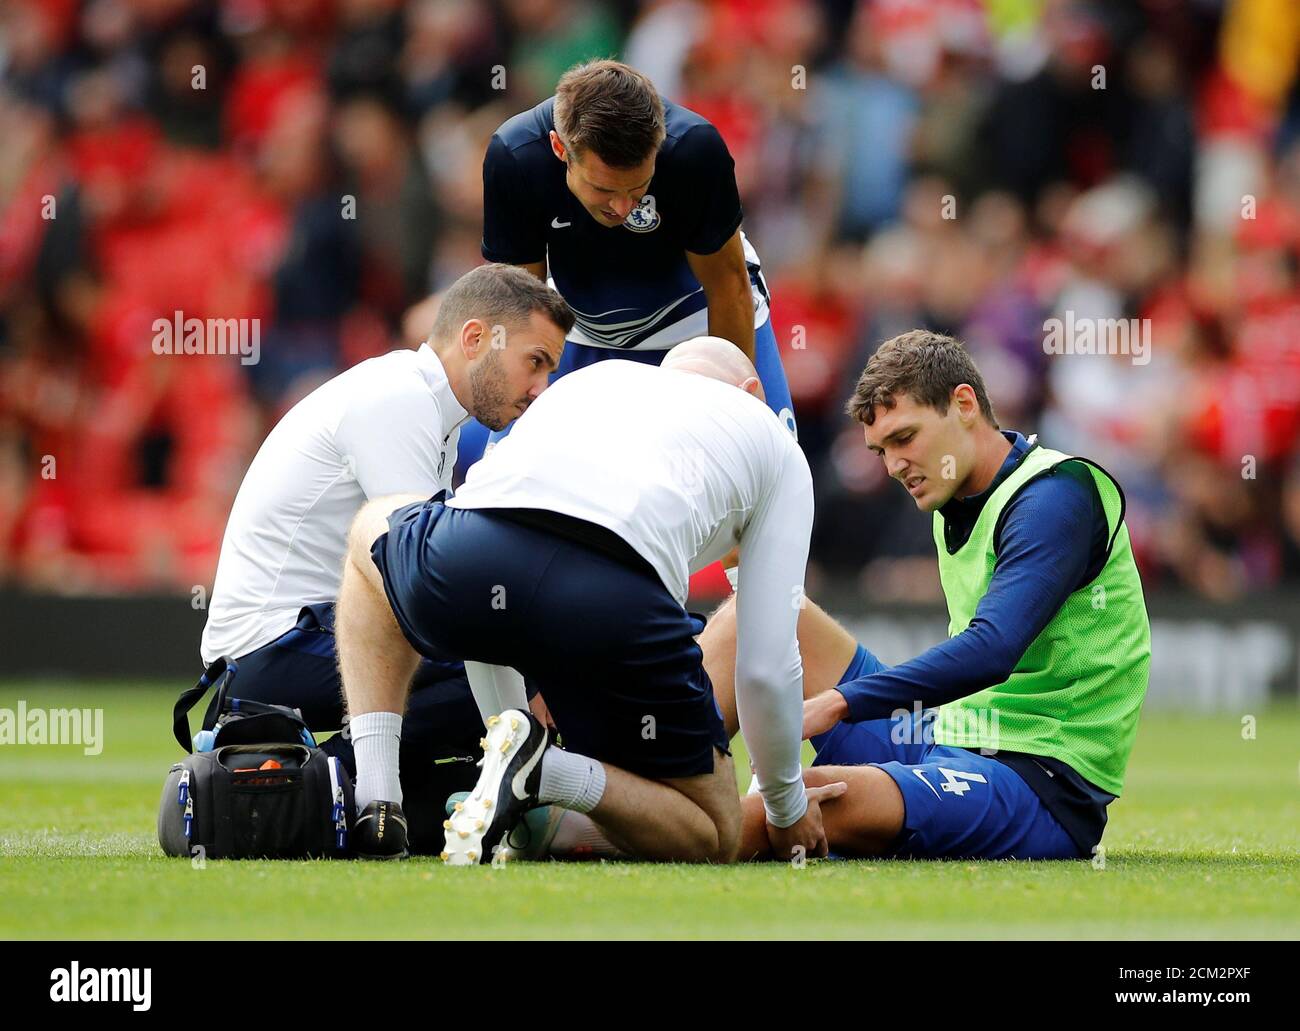 Soccer Football - Premier League - Manchester United v Chelsea - Old Trafford, Manchester, Britain - August 11, 2019  Chelsea's Andreas Christensen receives treatment after sustaining an injury during the warm up before the match  REUTERS/Phil Noble  EDITORIAL USE ONLY. No use with unauthorized audio, video, data, fixture lists, club/league logos or 'live' services. Online in-match use limited to 75 images, no video emulation. No use in betting, games or single club/league/player publications.  Please contact your account representative for further details. Stock Photo